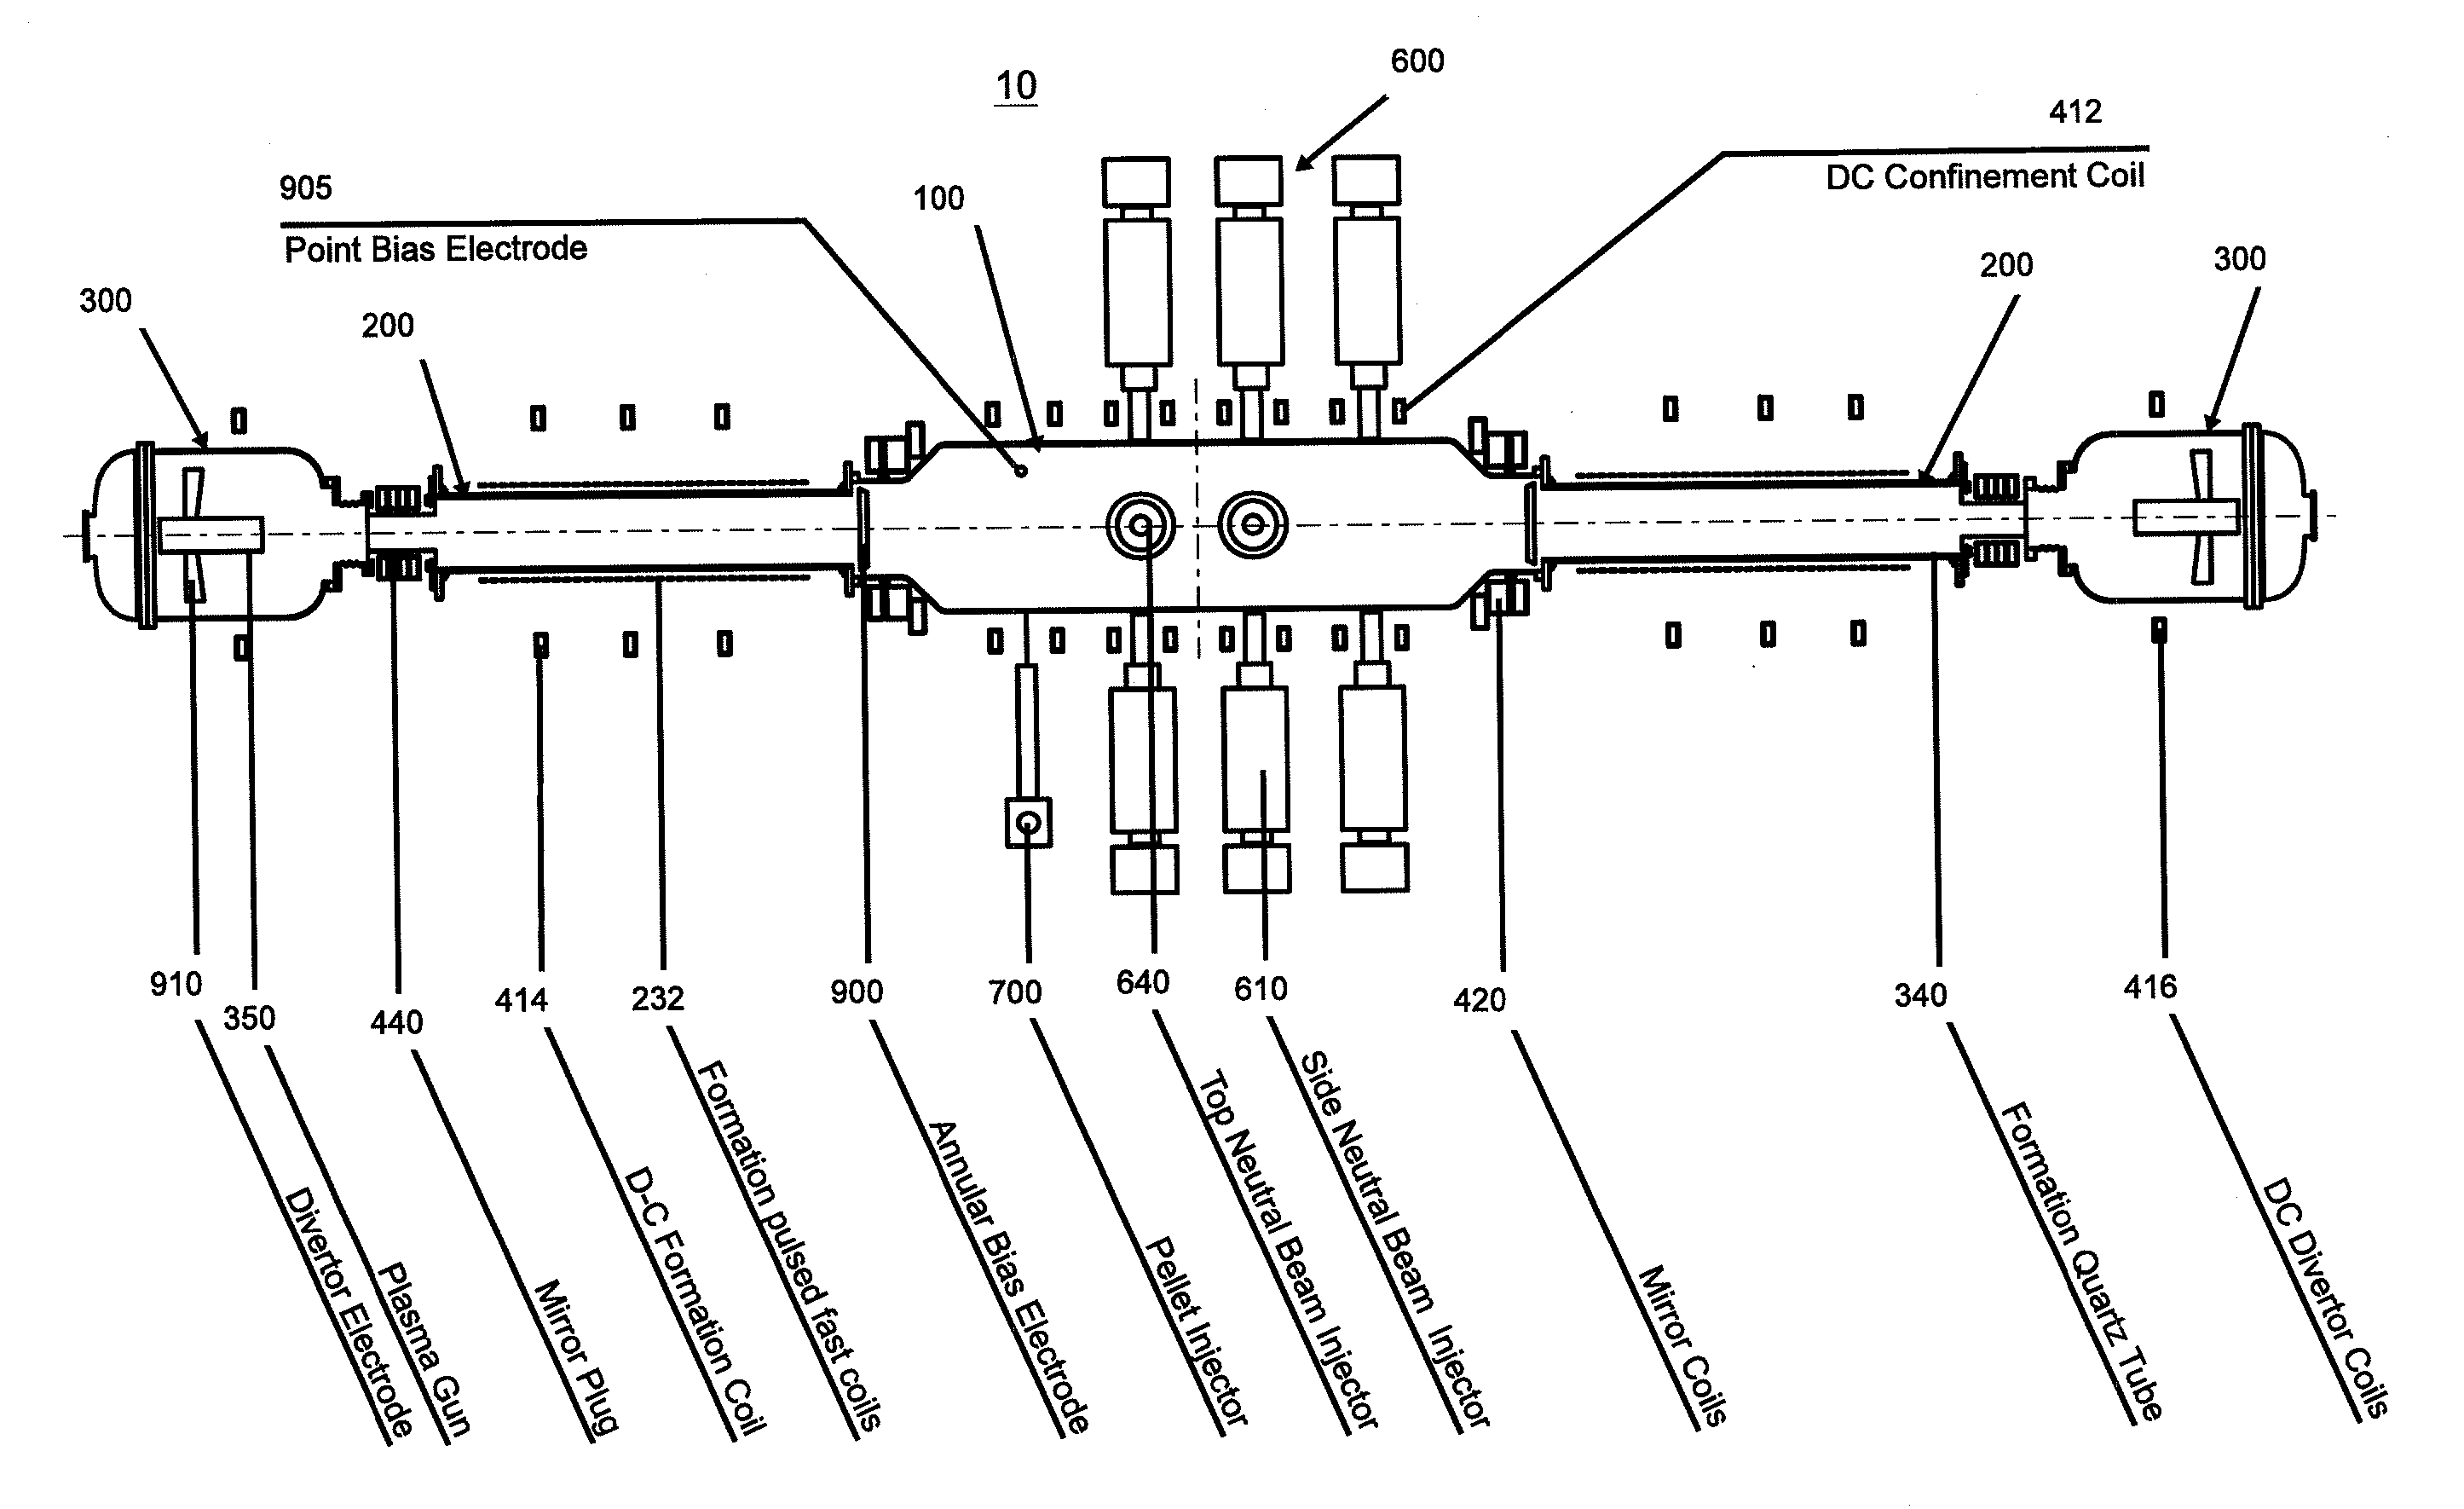 Systems and methods for forming and maintaining a high performance frc